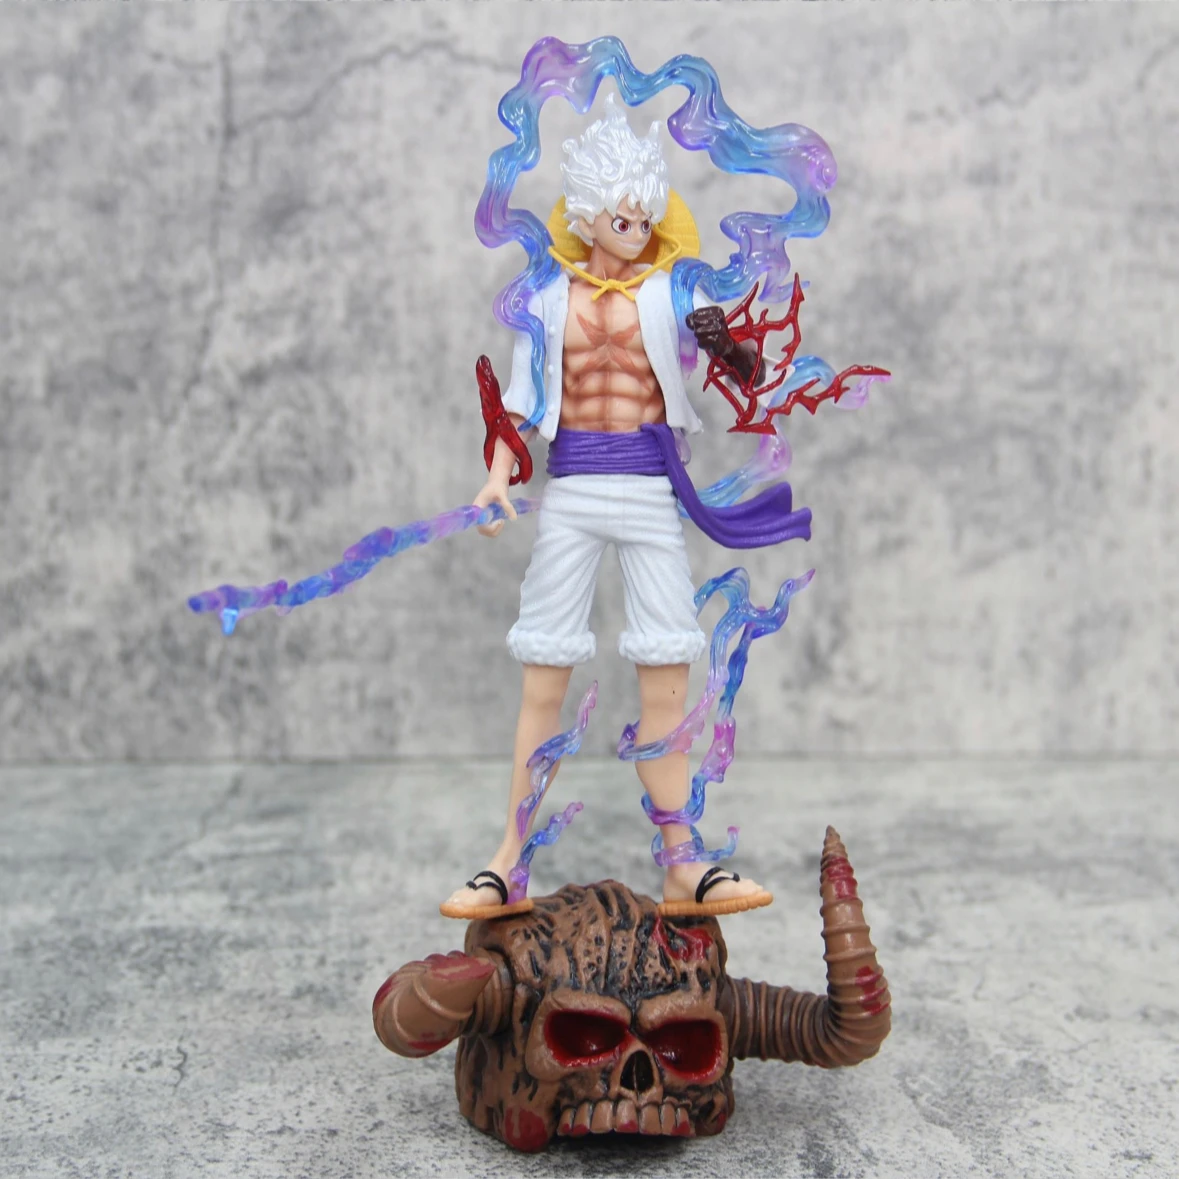 

30cm One Piece Luffy Gear 5 Anime Figure Sun God Nika PVC Action Figurine Statue Collectible Model Doll Decoration Toy Kids Gift